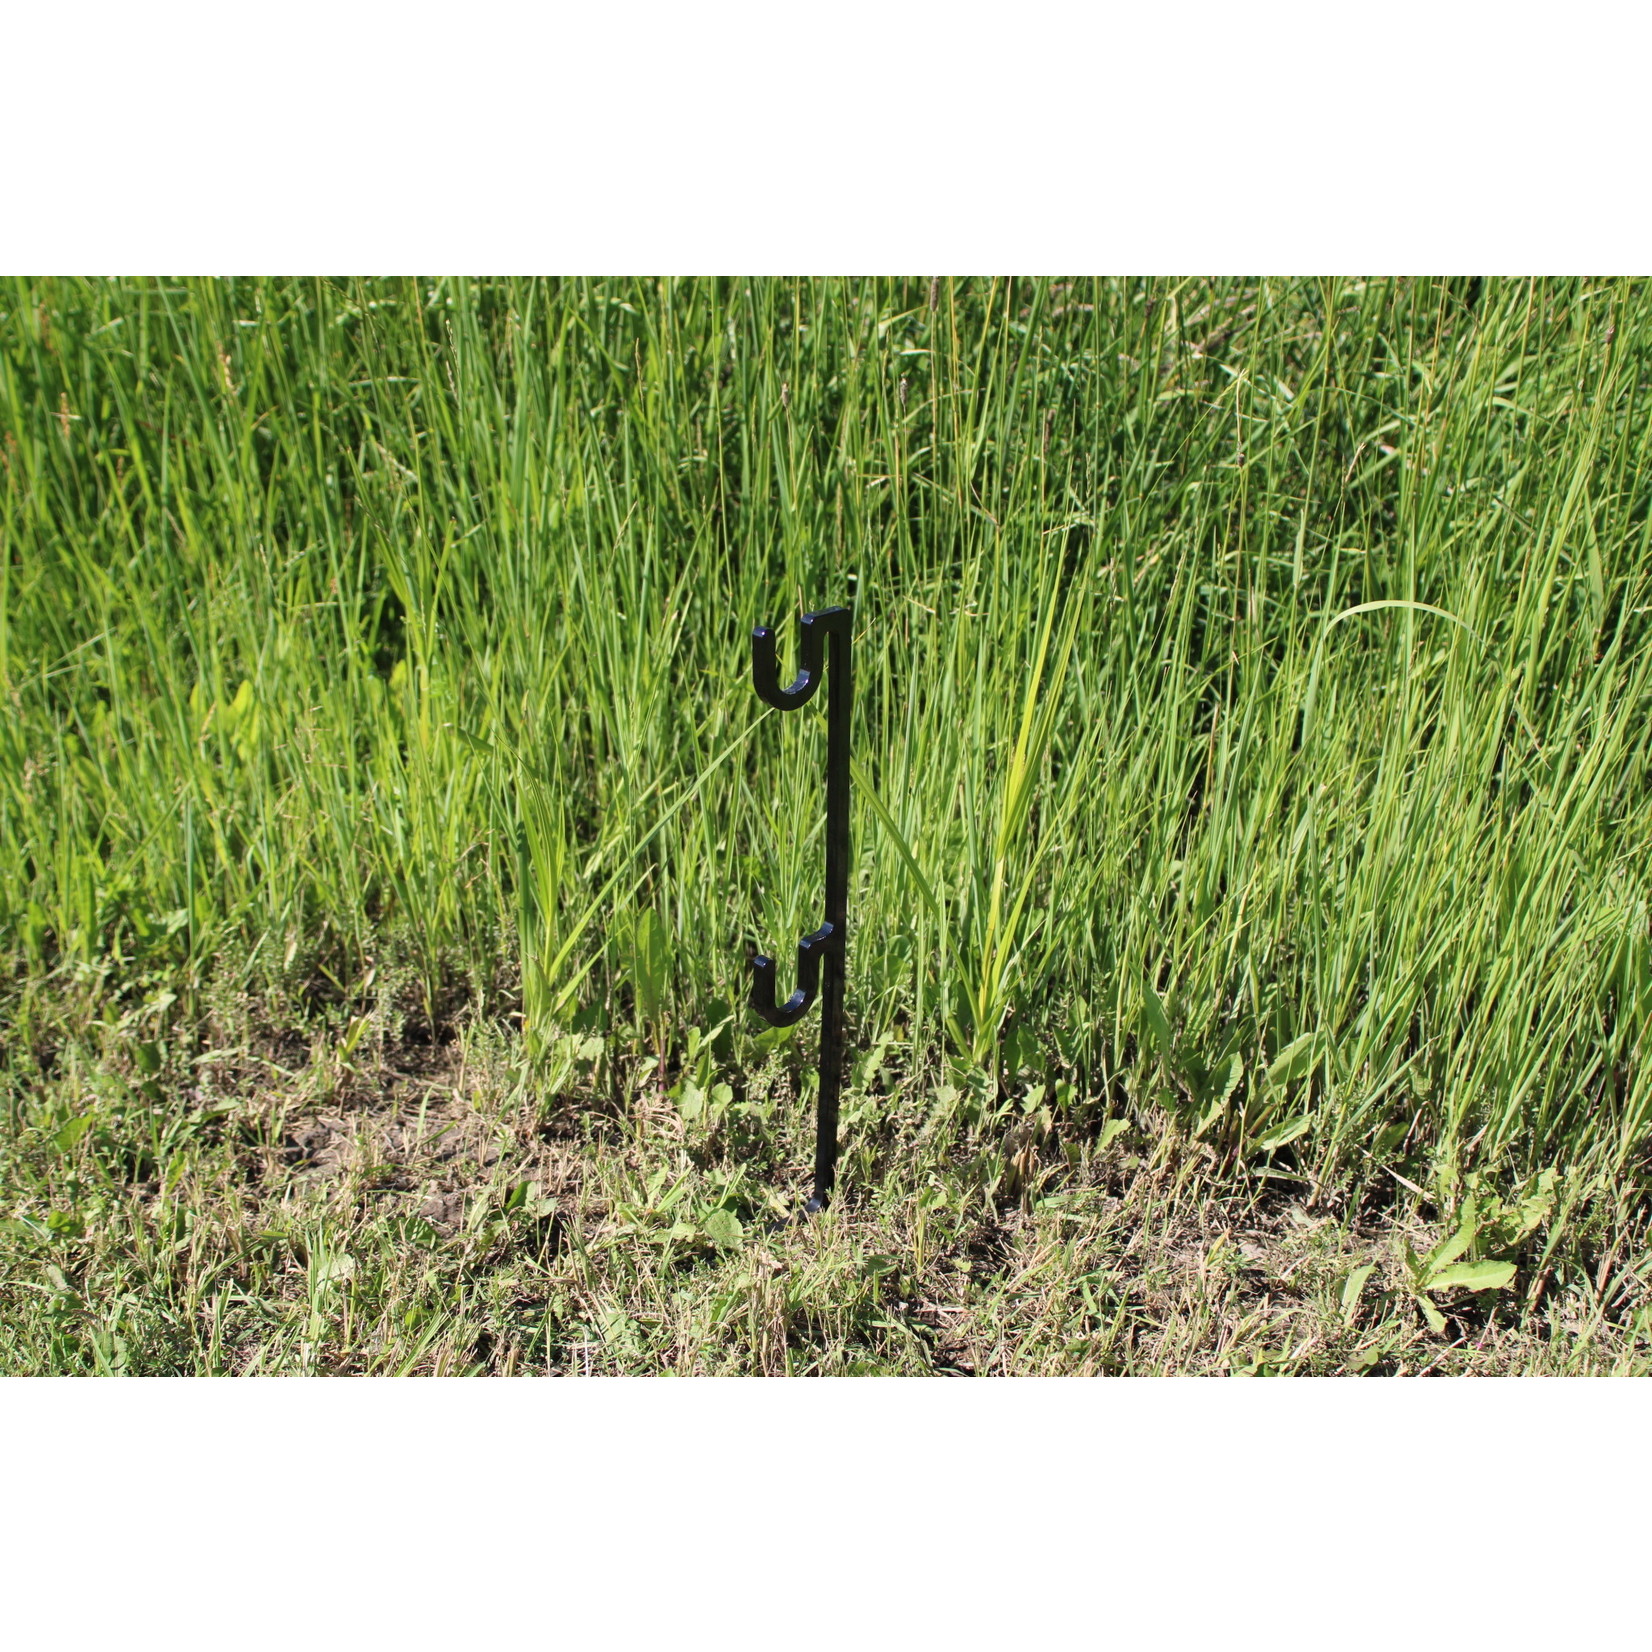 ENGAGE PRECISION ENGAGE PRECISION AR500 STEEL SHEPHERD HOOK TARGET STAND, 3/8”, 24” HEIGHT, W/ 2 HOOKS, BLACK